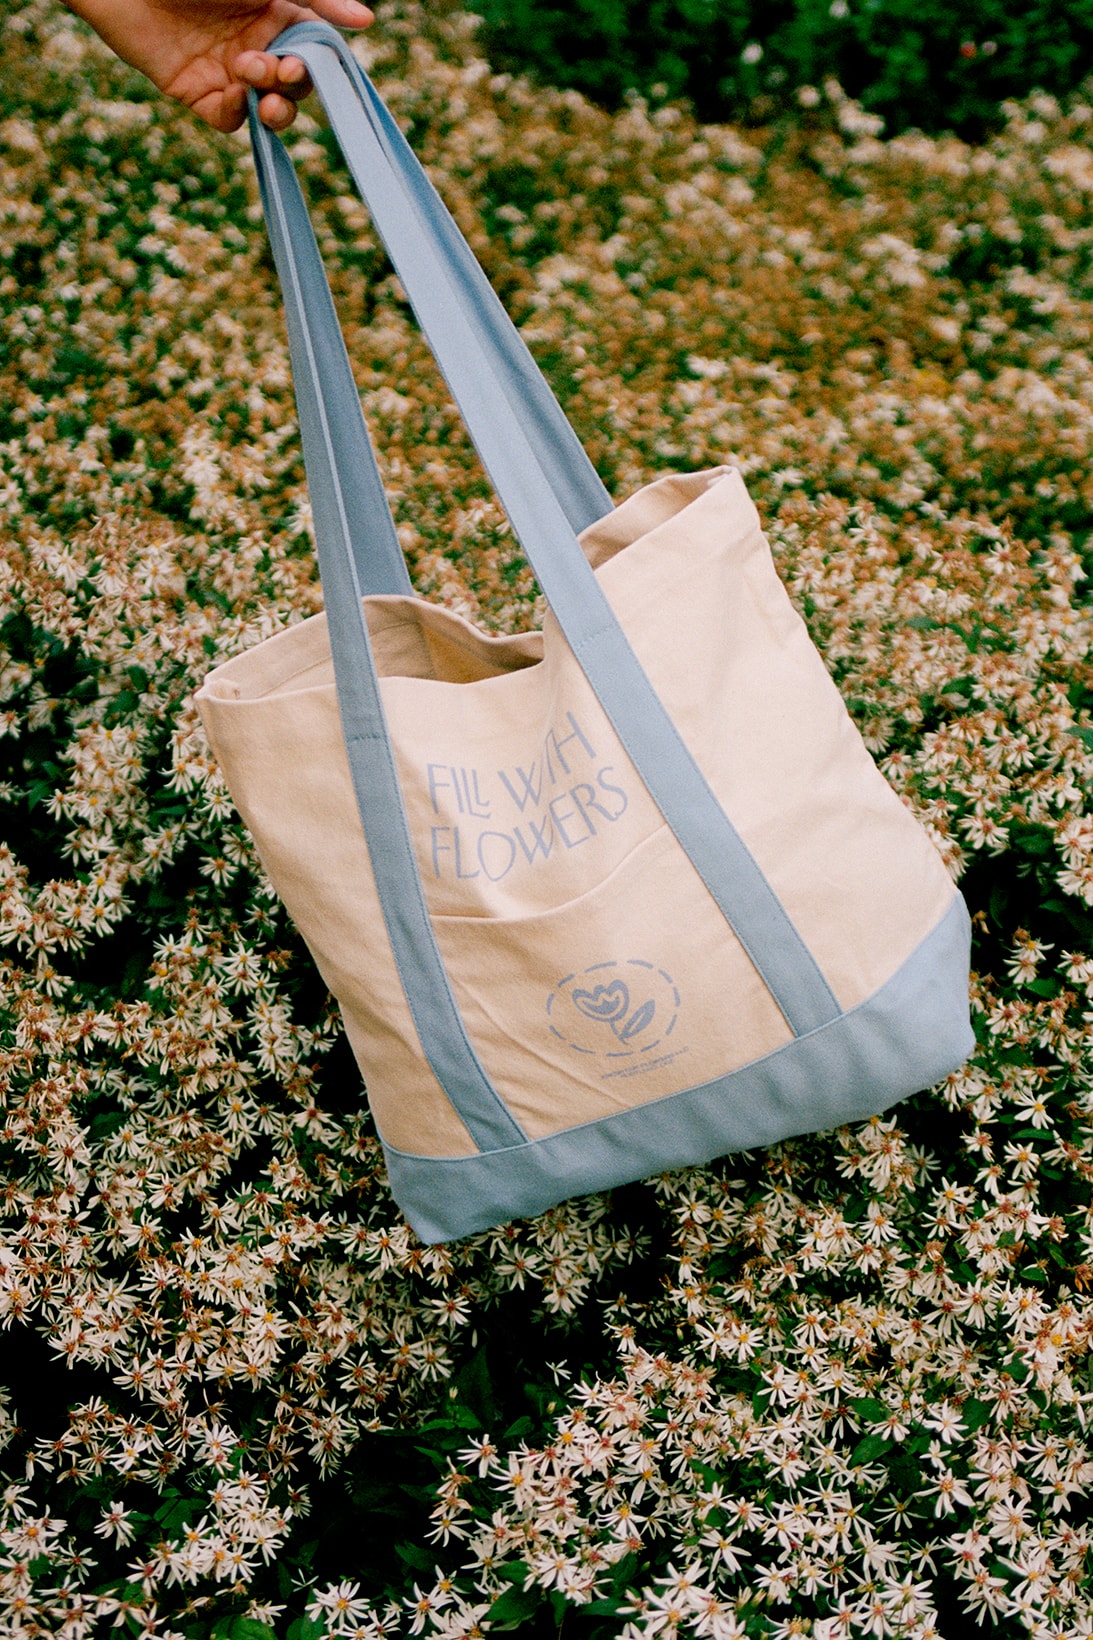 fresh cut flowers fall winter collection tees tote bags lookbook